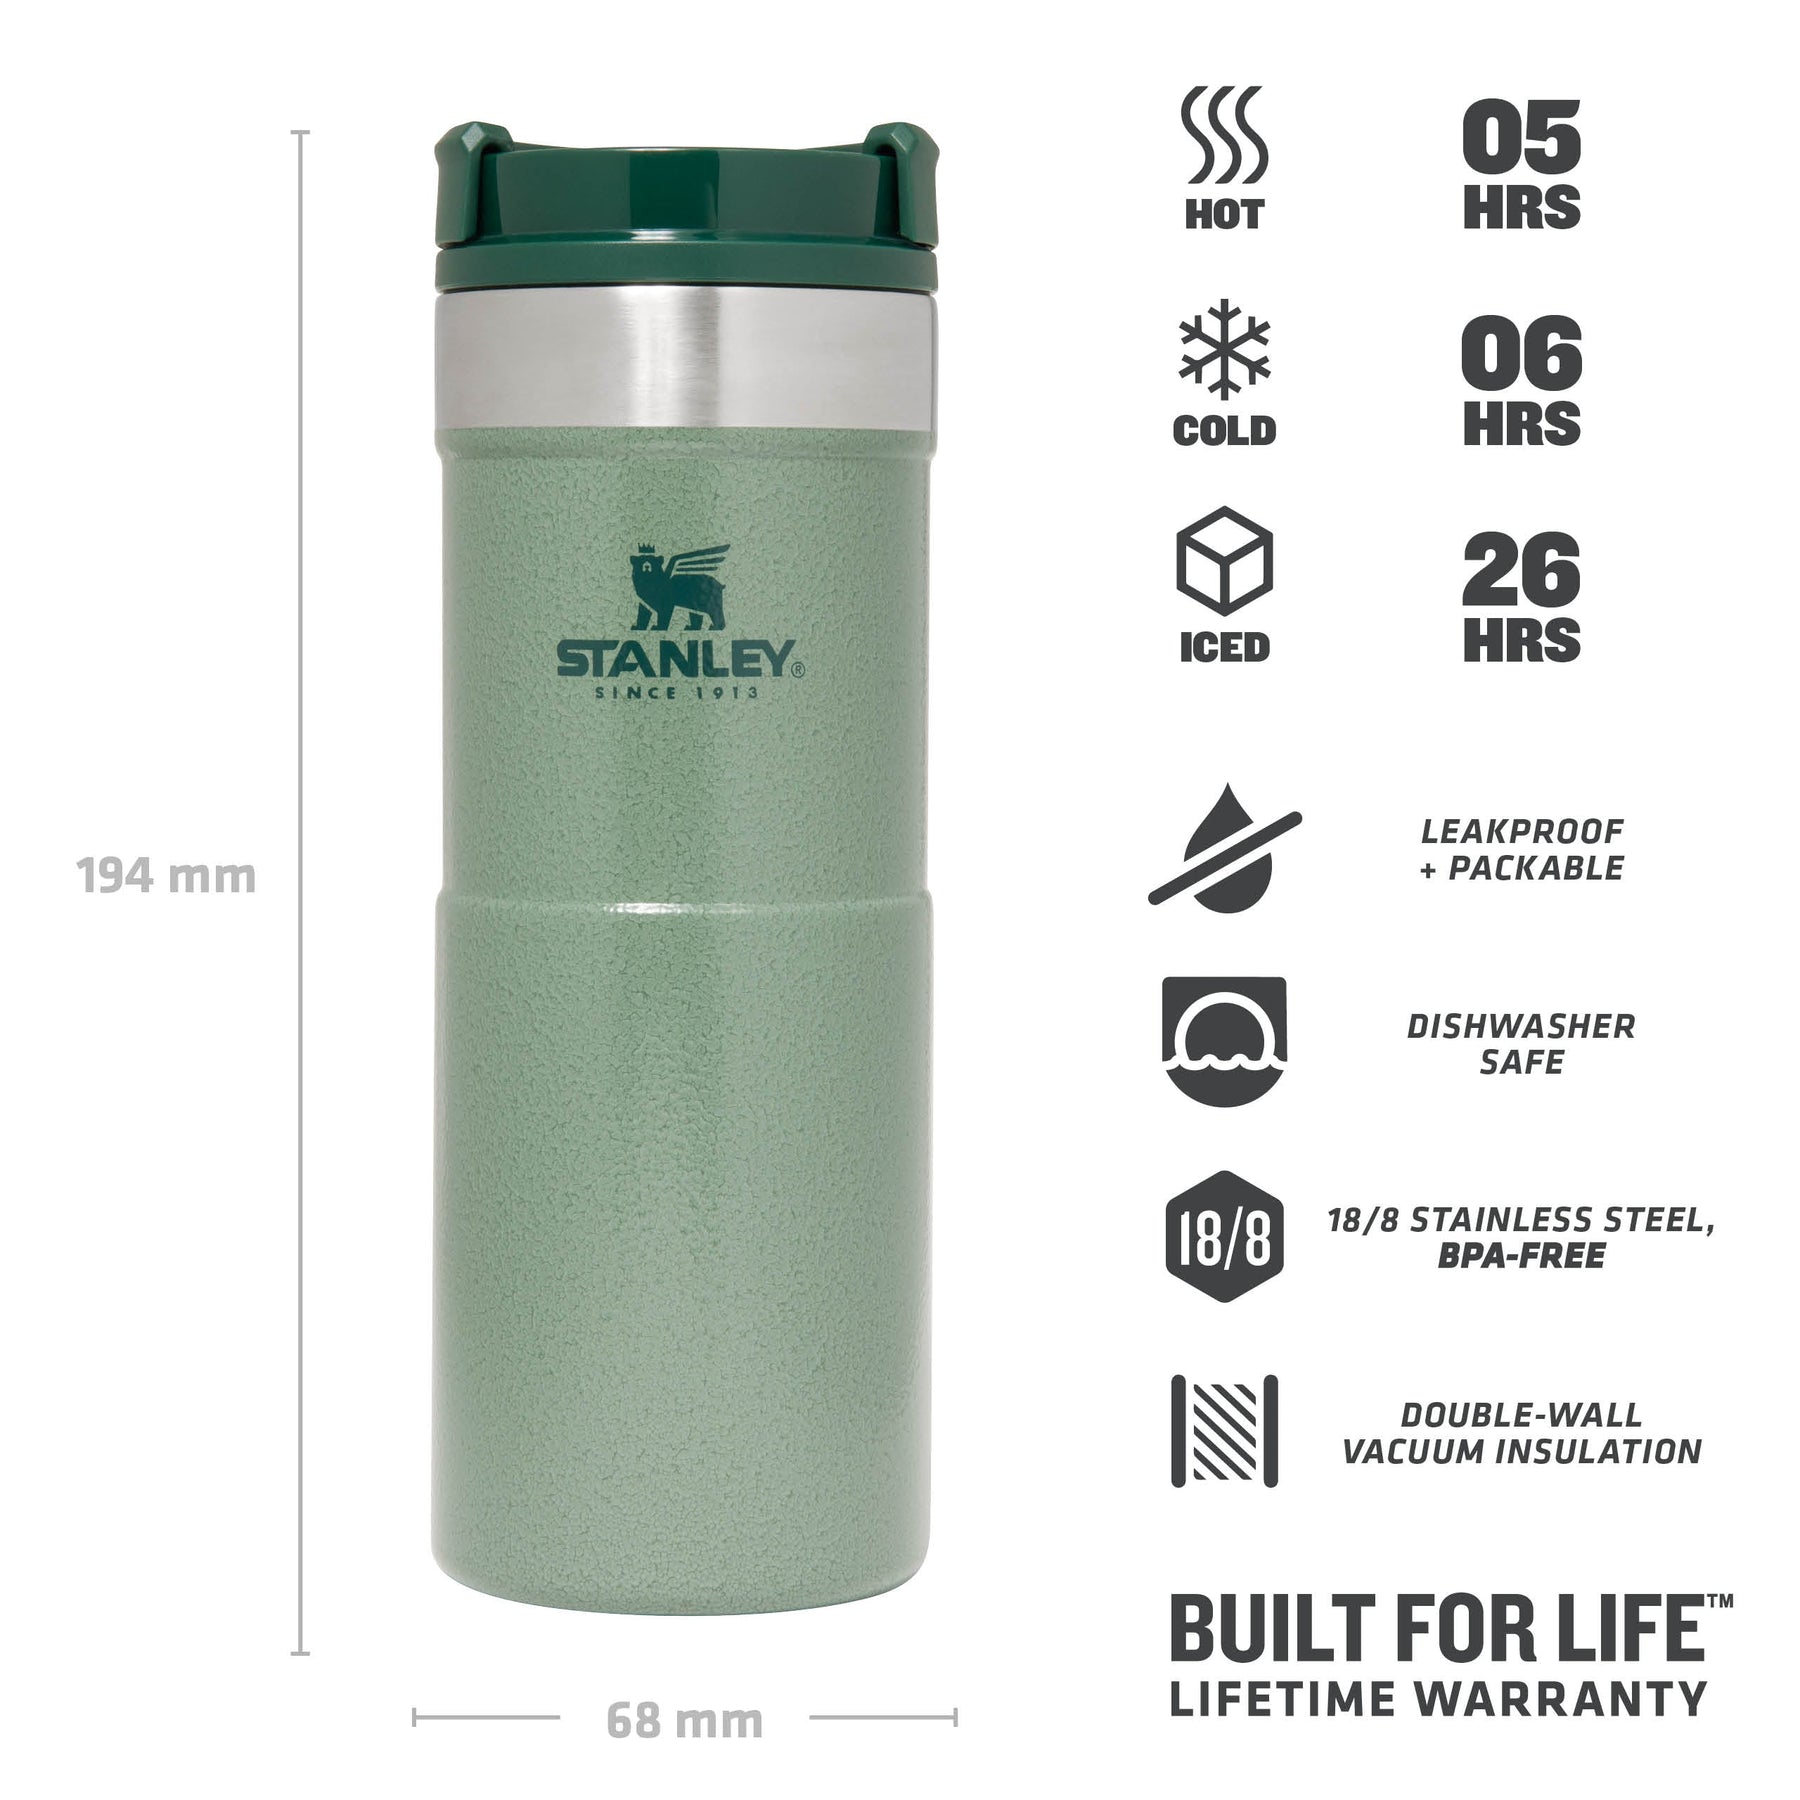 Stanley 24 oz Travel Thermos Green Top Stainless Steel